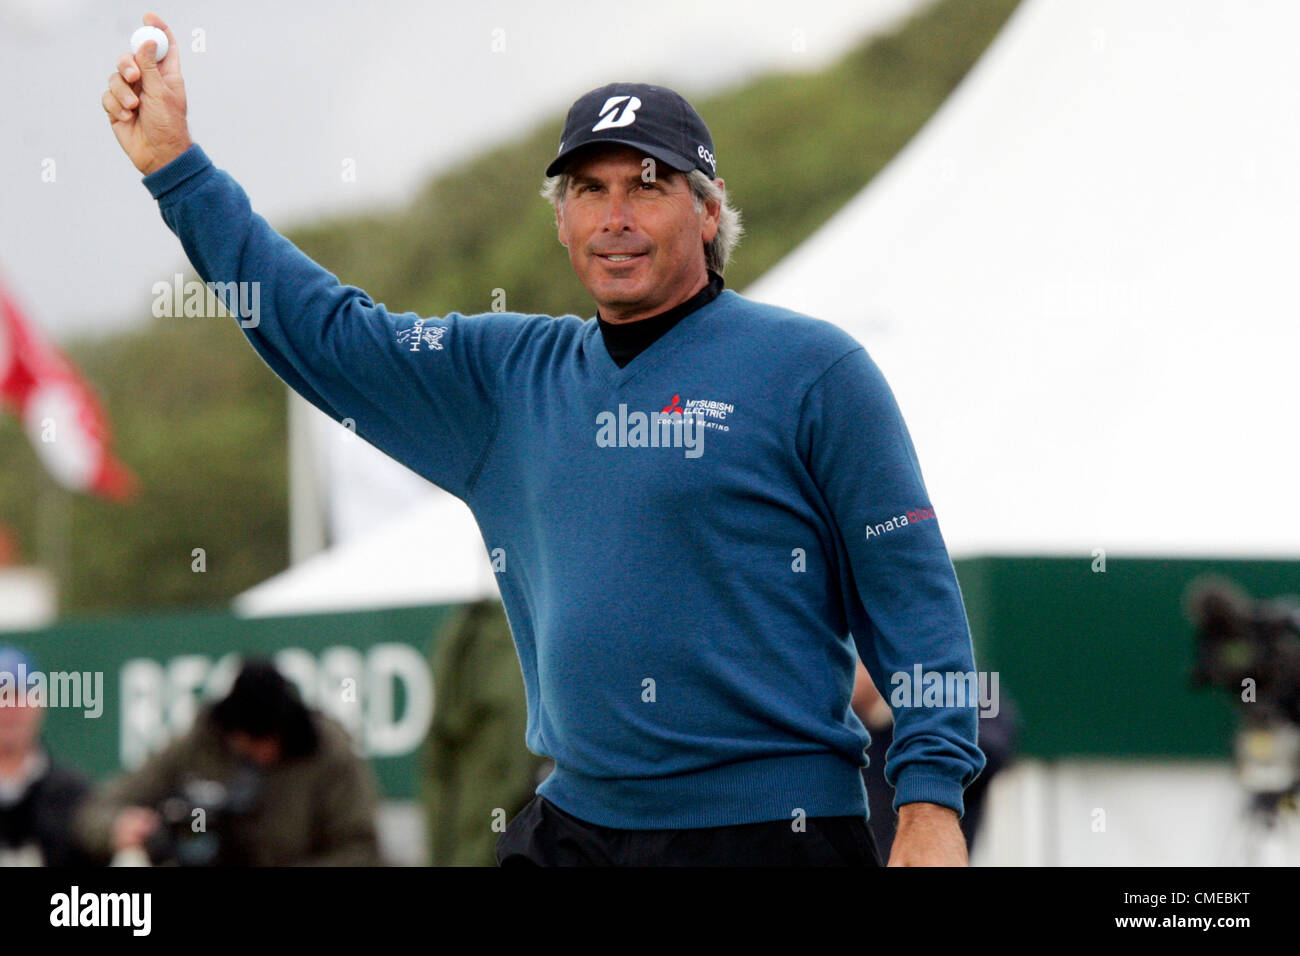 Ayrshire, UK. 29th July, 2012. Fred COUPLES winner of the The Rolex Senior Open Championship from Turnberry. Stock Photo